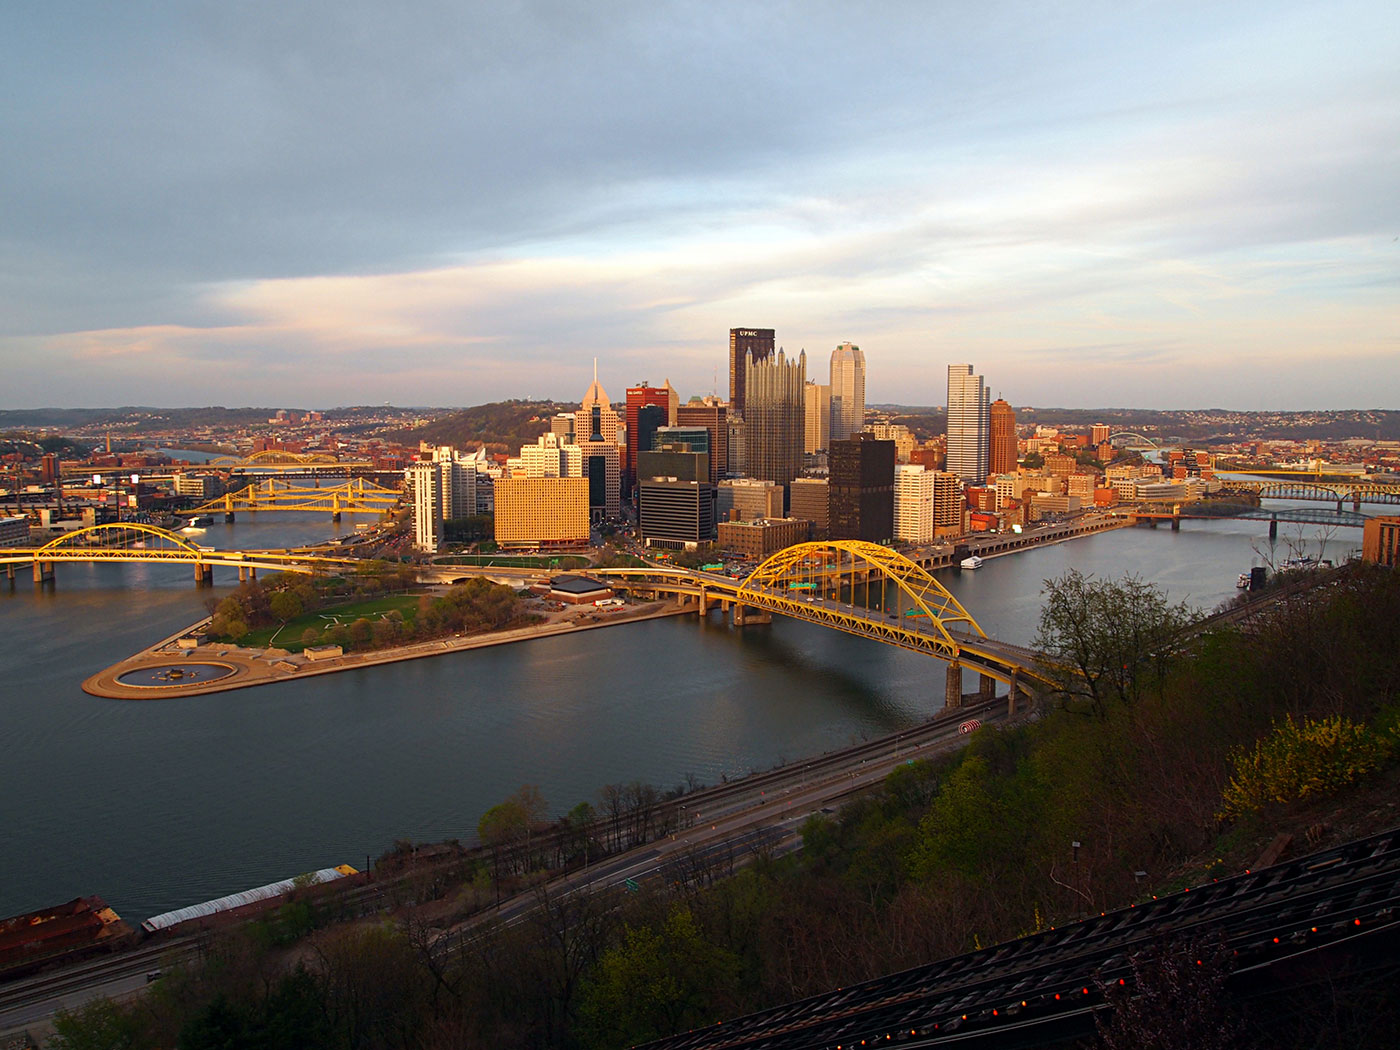 A view of the Pittsburgh skyline at sunset